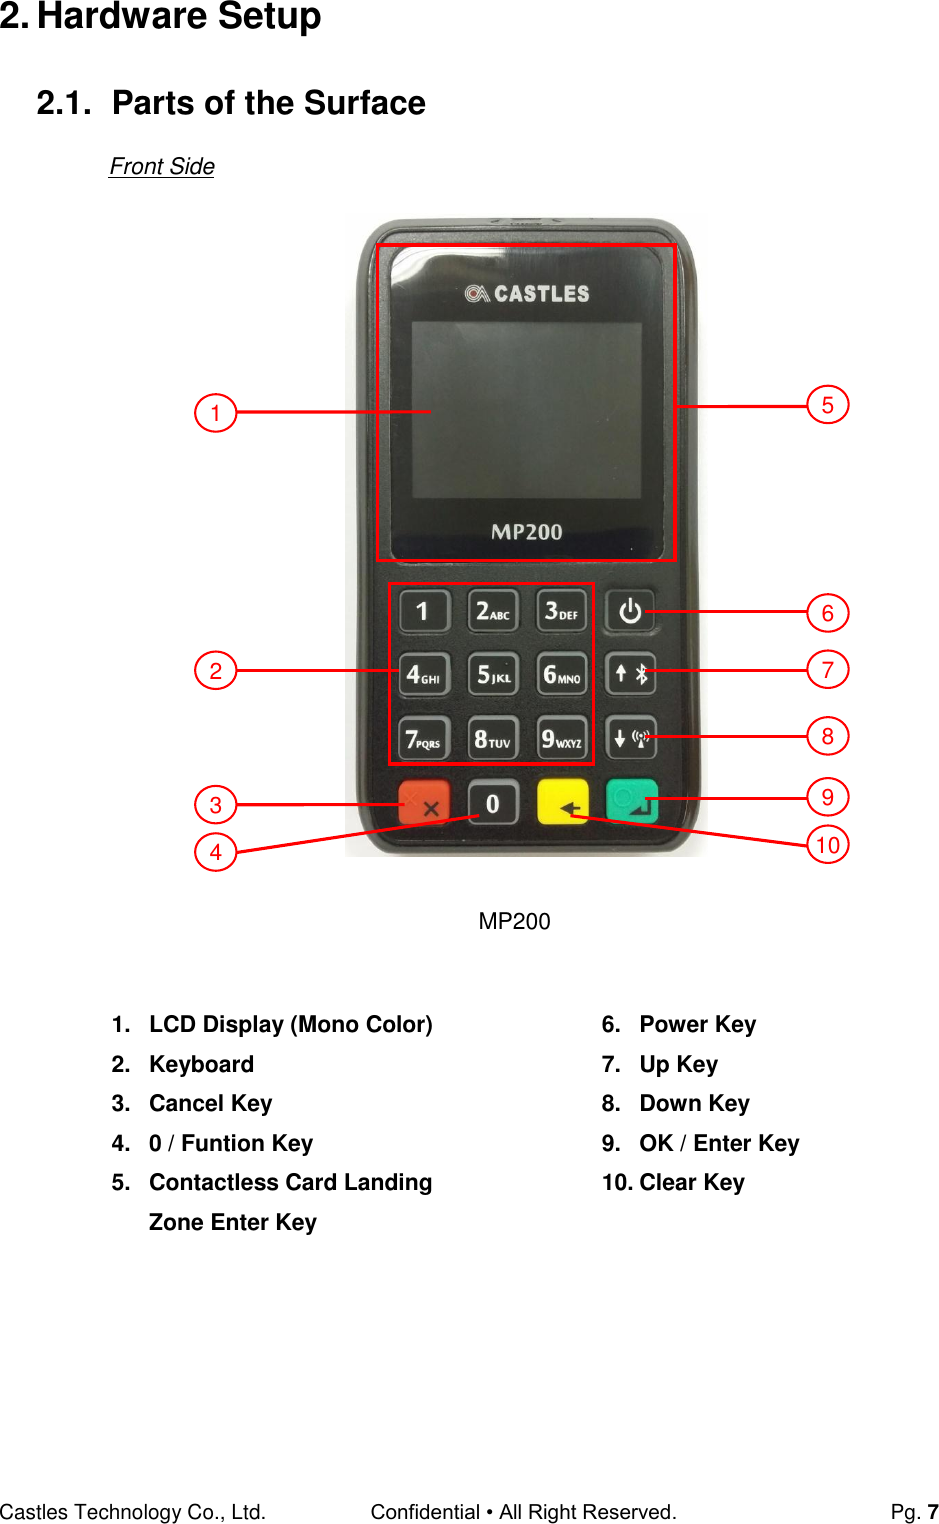 Castles Technology Co., Ltd. Confidential • All Right Reserved.  Pg. 7 2. Hardware Setup  2.1.  Parts of the Surface Front Side          1.  LCD Display (Mono Color) 2.  Keyboard 3.  Cancel Key 4.  0 / Funtion Key 5.  Contactless Card Landing Zone Enter Key 6.  Power Key 7.  Up Key 8.  Down Key 9.  OK / Enter Key 10. Clear Key      MP200 3 6 9 7 8 4 2 1 5 10 